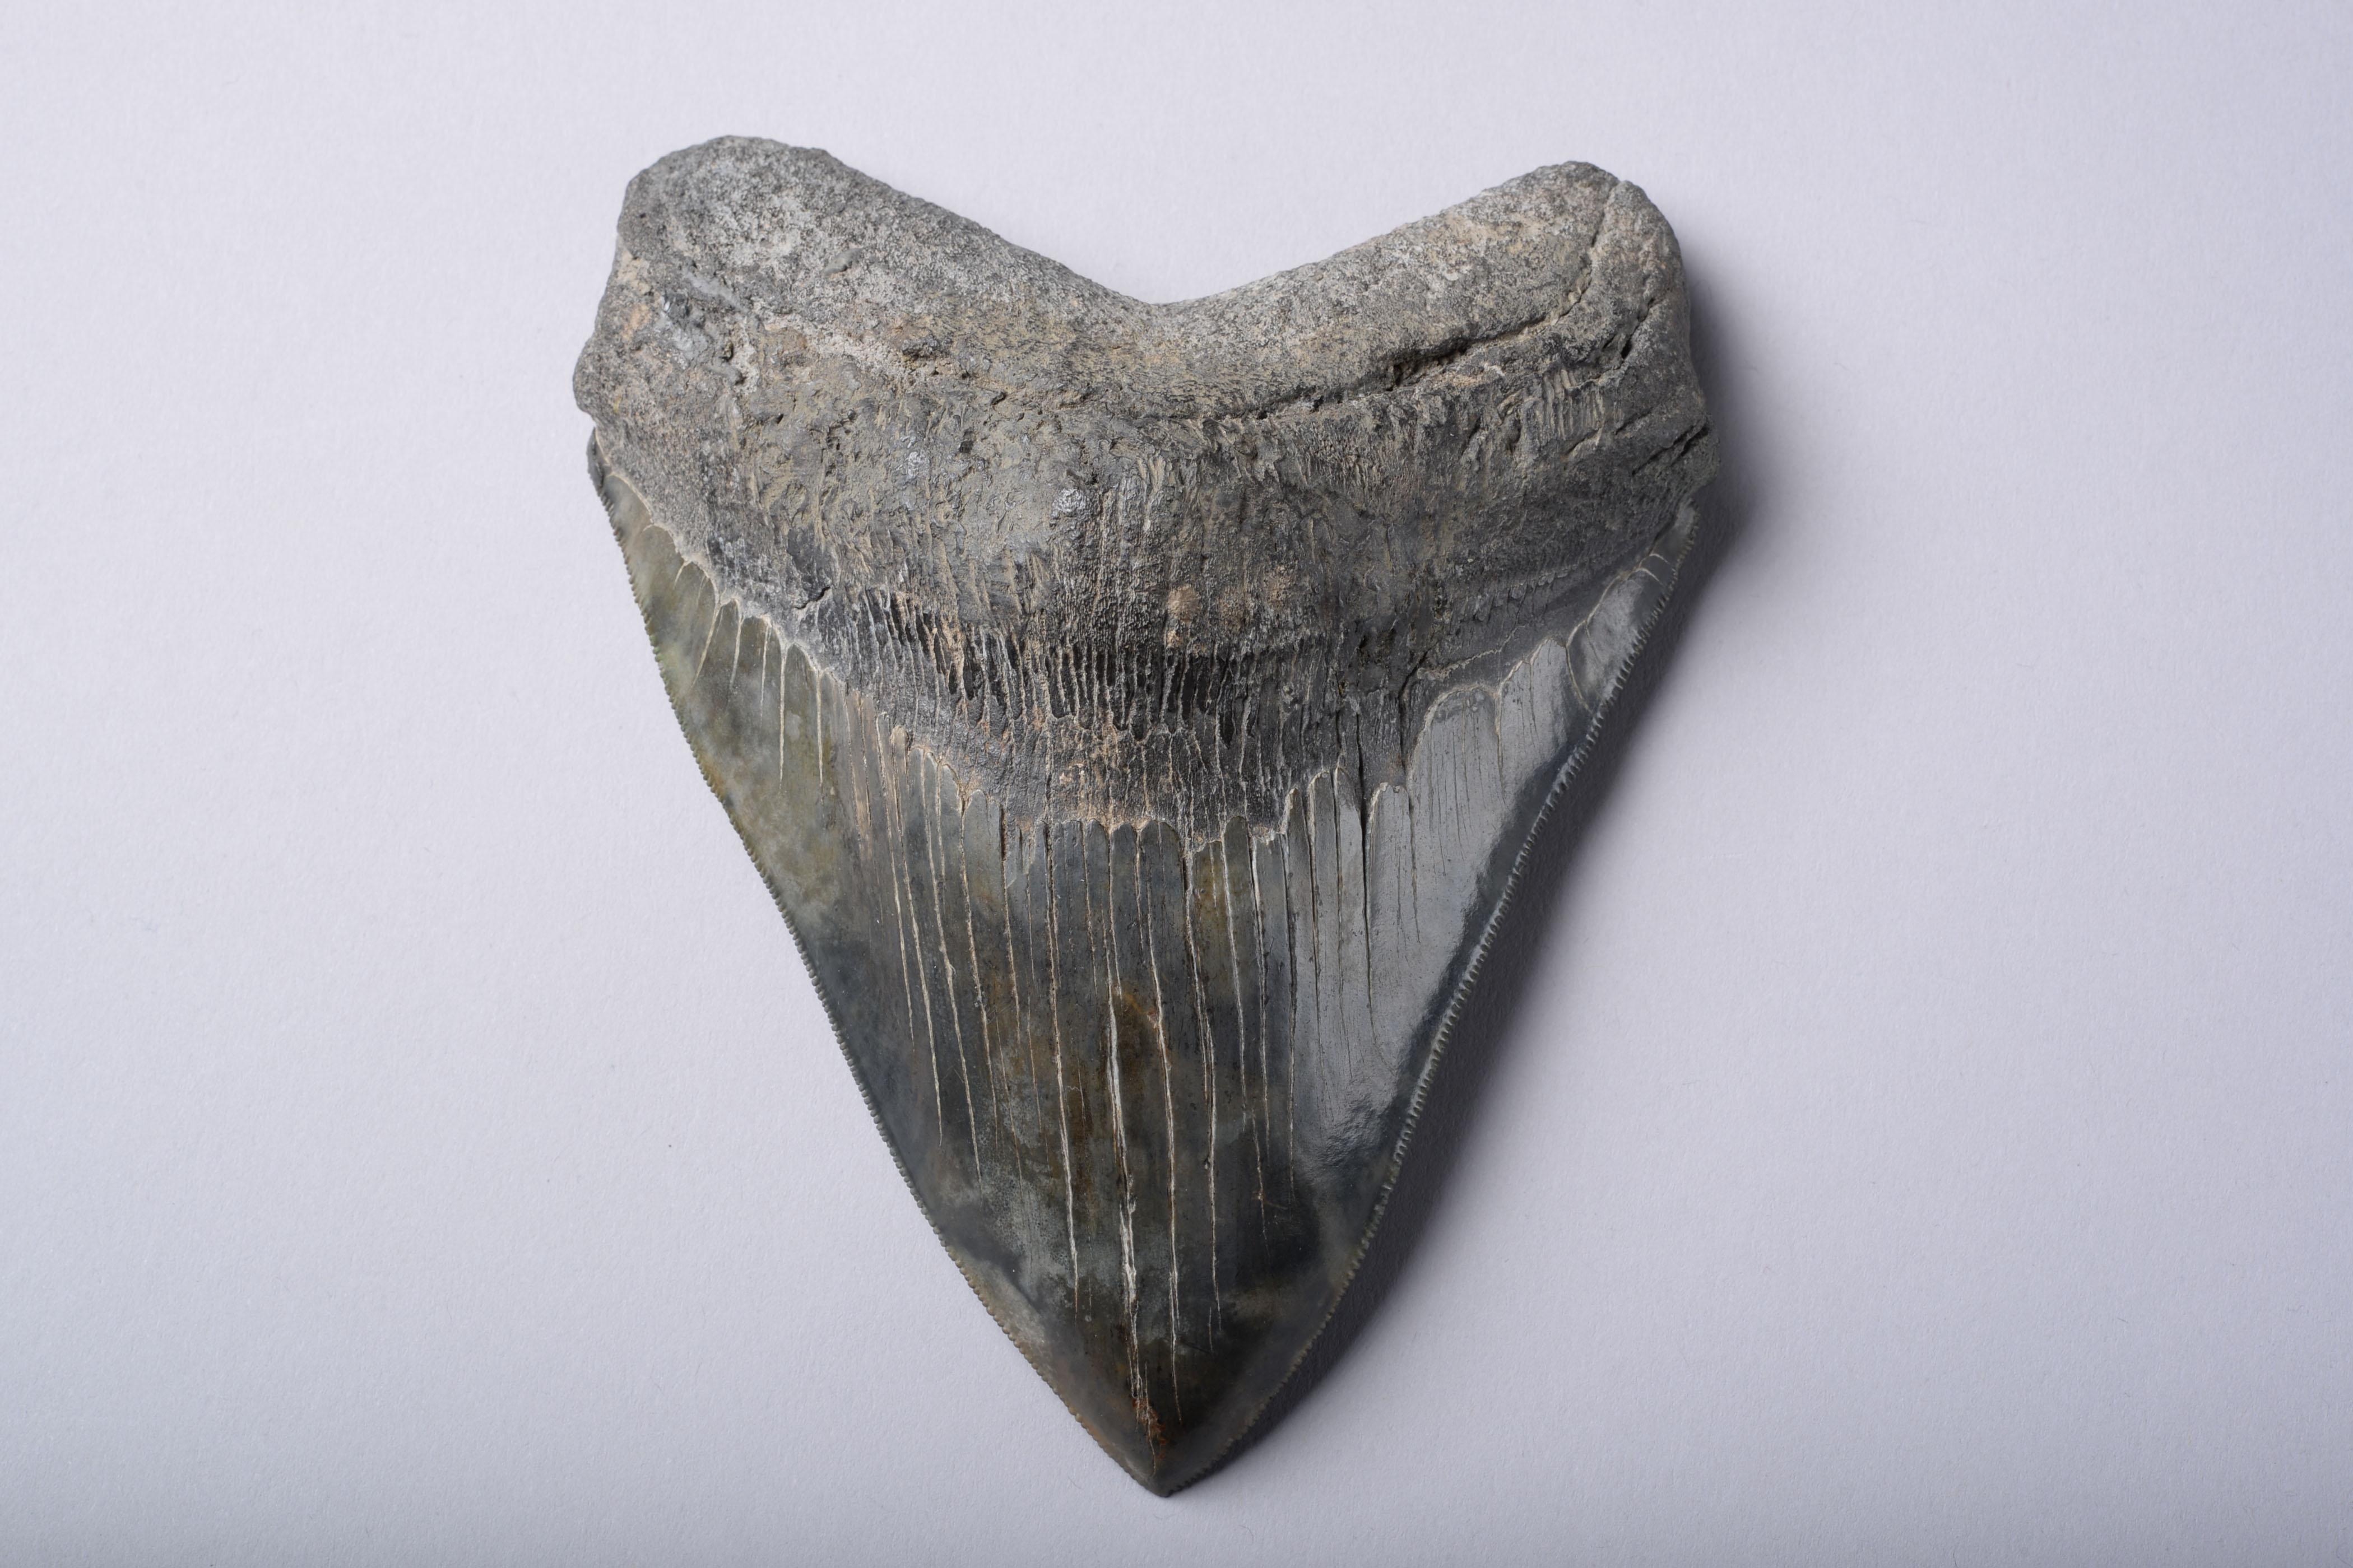 This exceedingly large and beautifully preserved serrated tooth would have once lined the mouth of a big Megalodon shark (Carcharocles megalodon).

The mightiest and most terrifying marine predator of all times, Megalodon may have been up to 60 feet